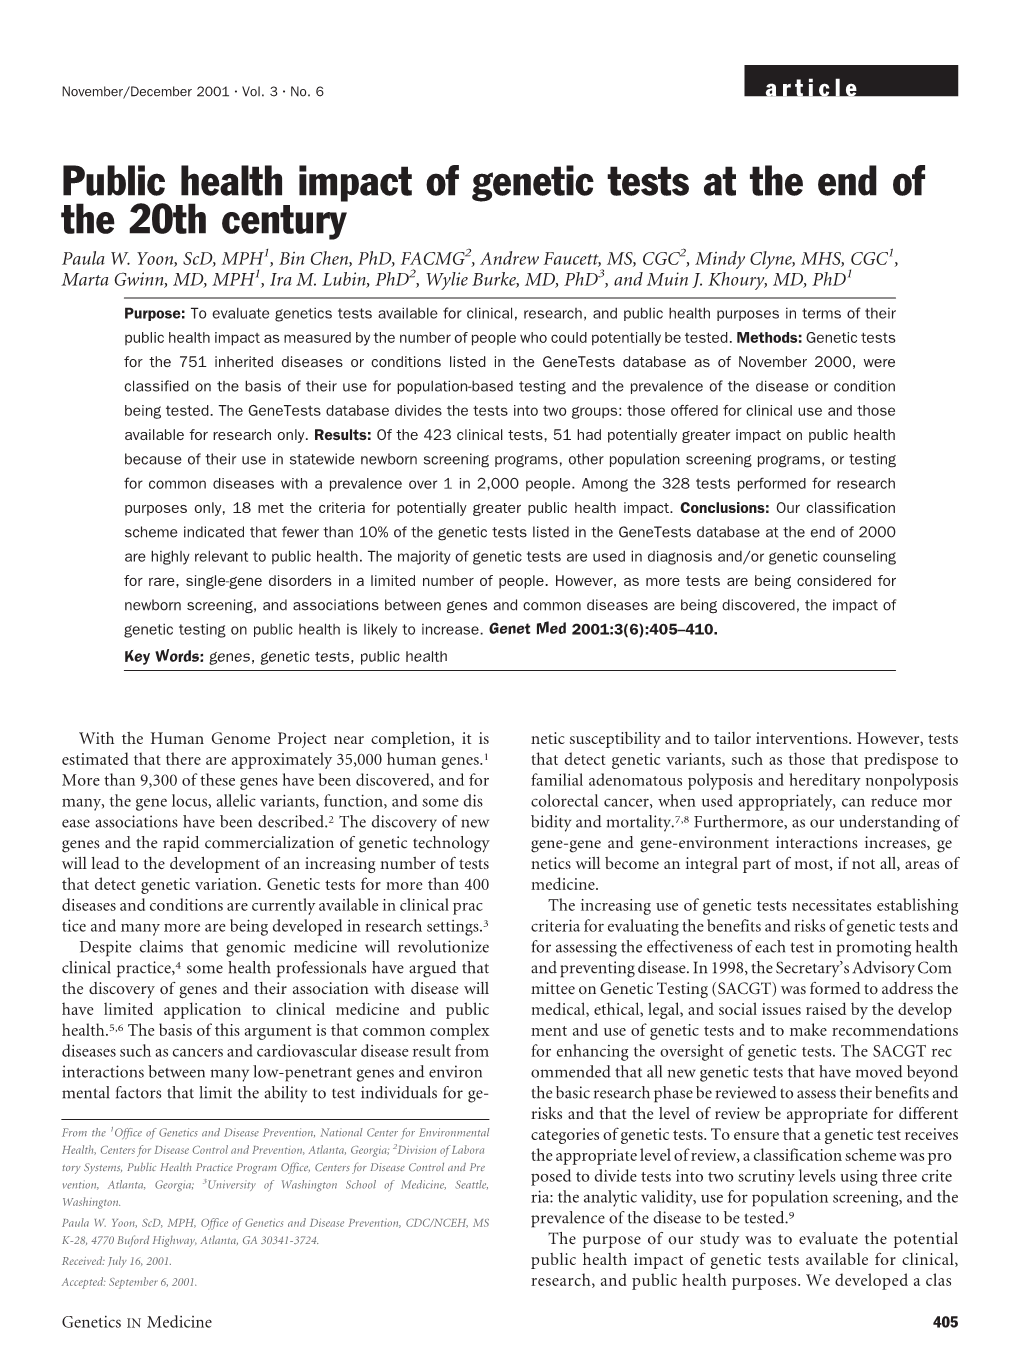 Public Health Impact of Genetic Tests at the End of the 20Th Century Paula W